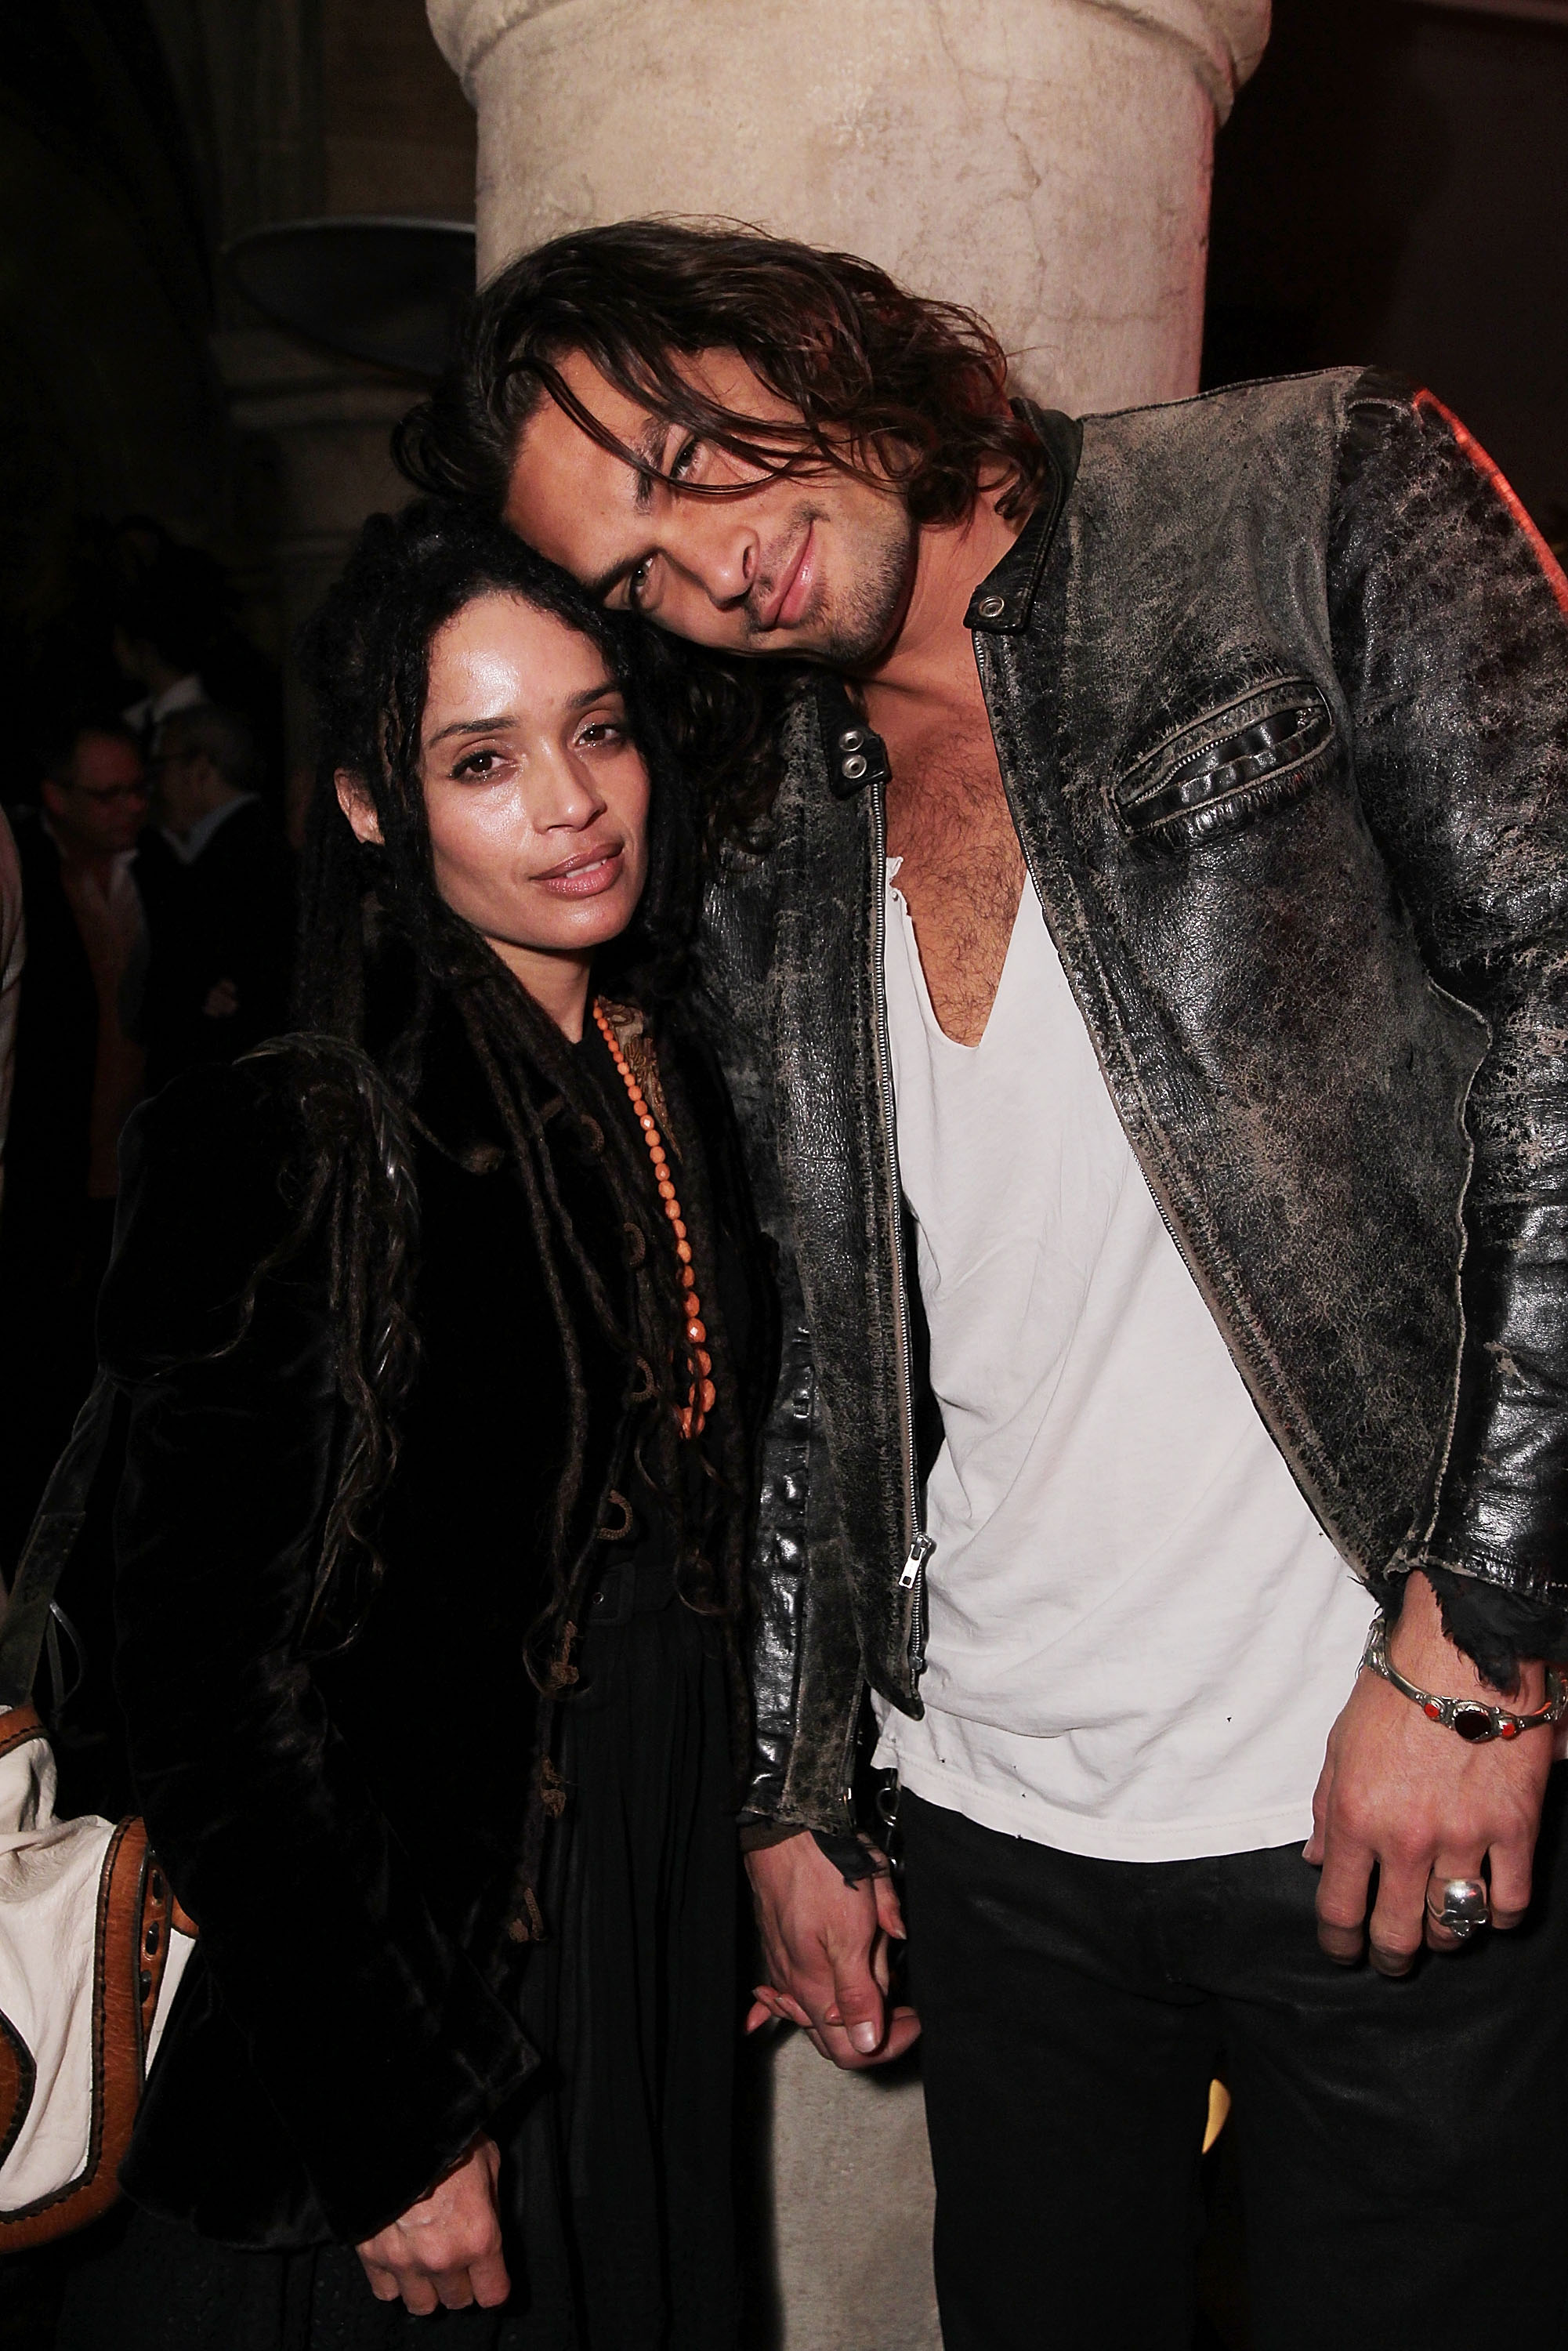 Lisa Bonet and Jason Momoa at Entertainment Weekly's party to celebrate the Best Director Oscar Nominees held at Chateau Marmont on February 25, 2010, in Los Angeles, California. | Source: Getty Images